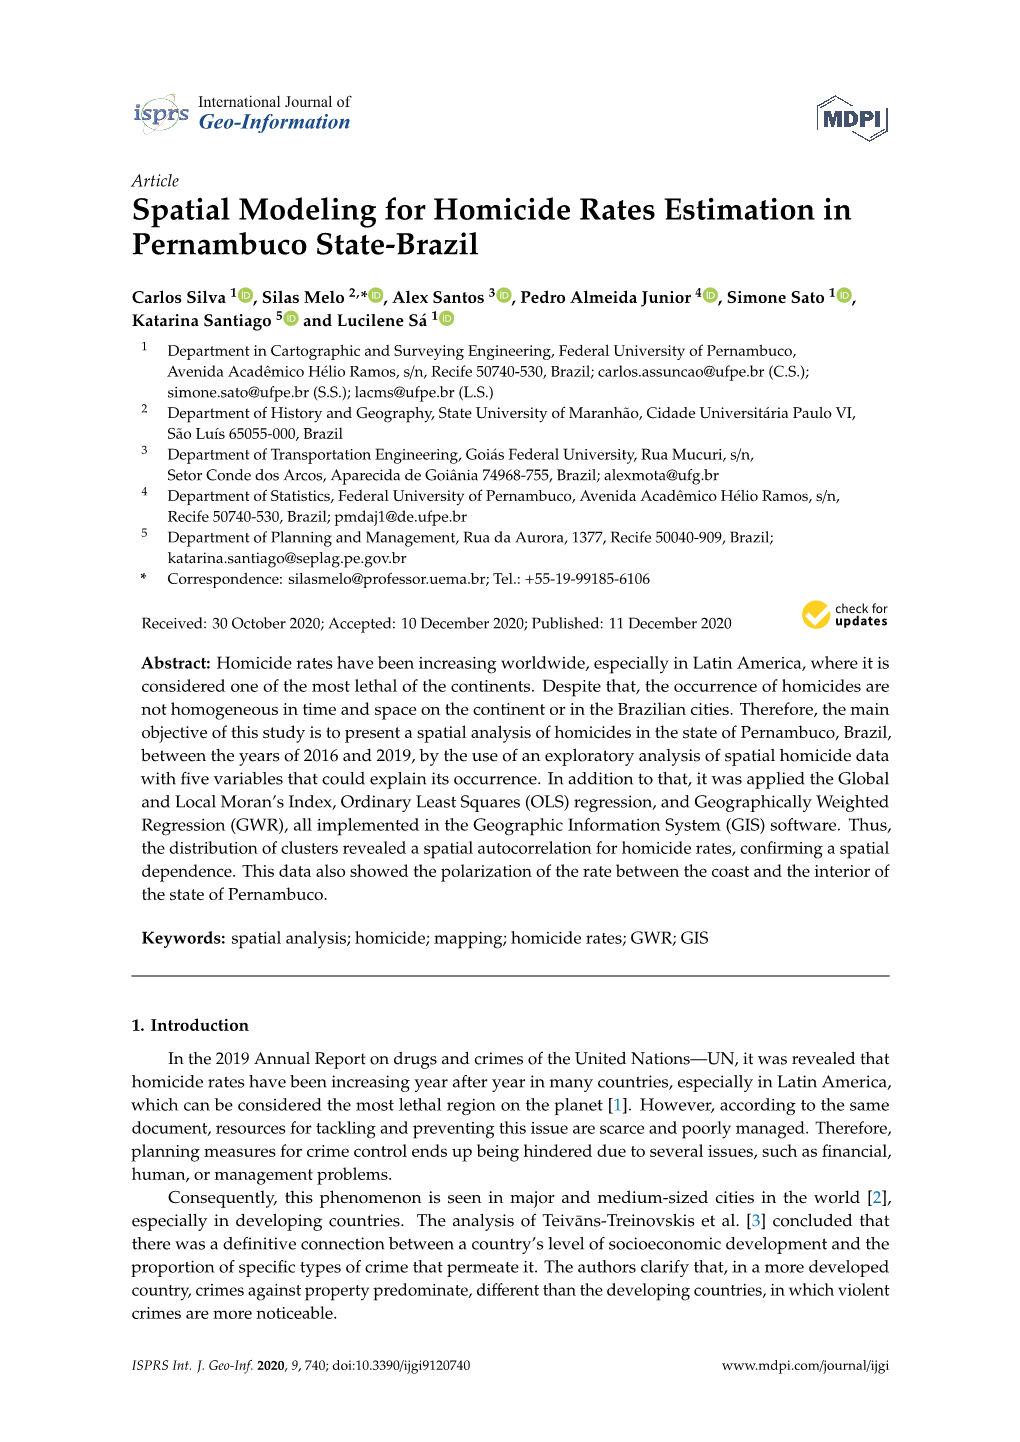 Spatial Modeling for Homicide Rates Estimation in Pernambuco State-Brazil